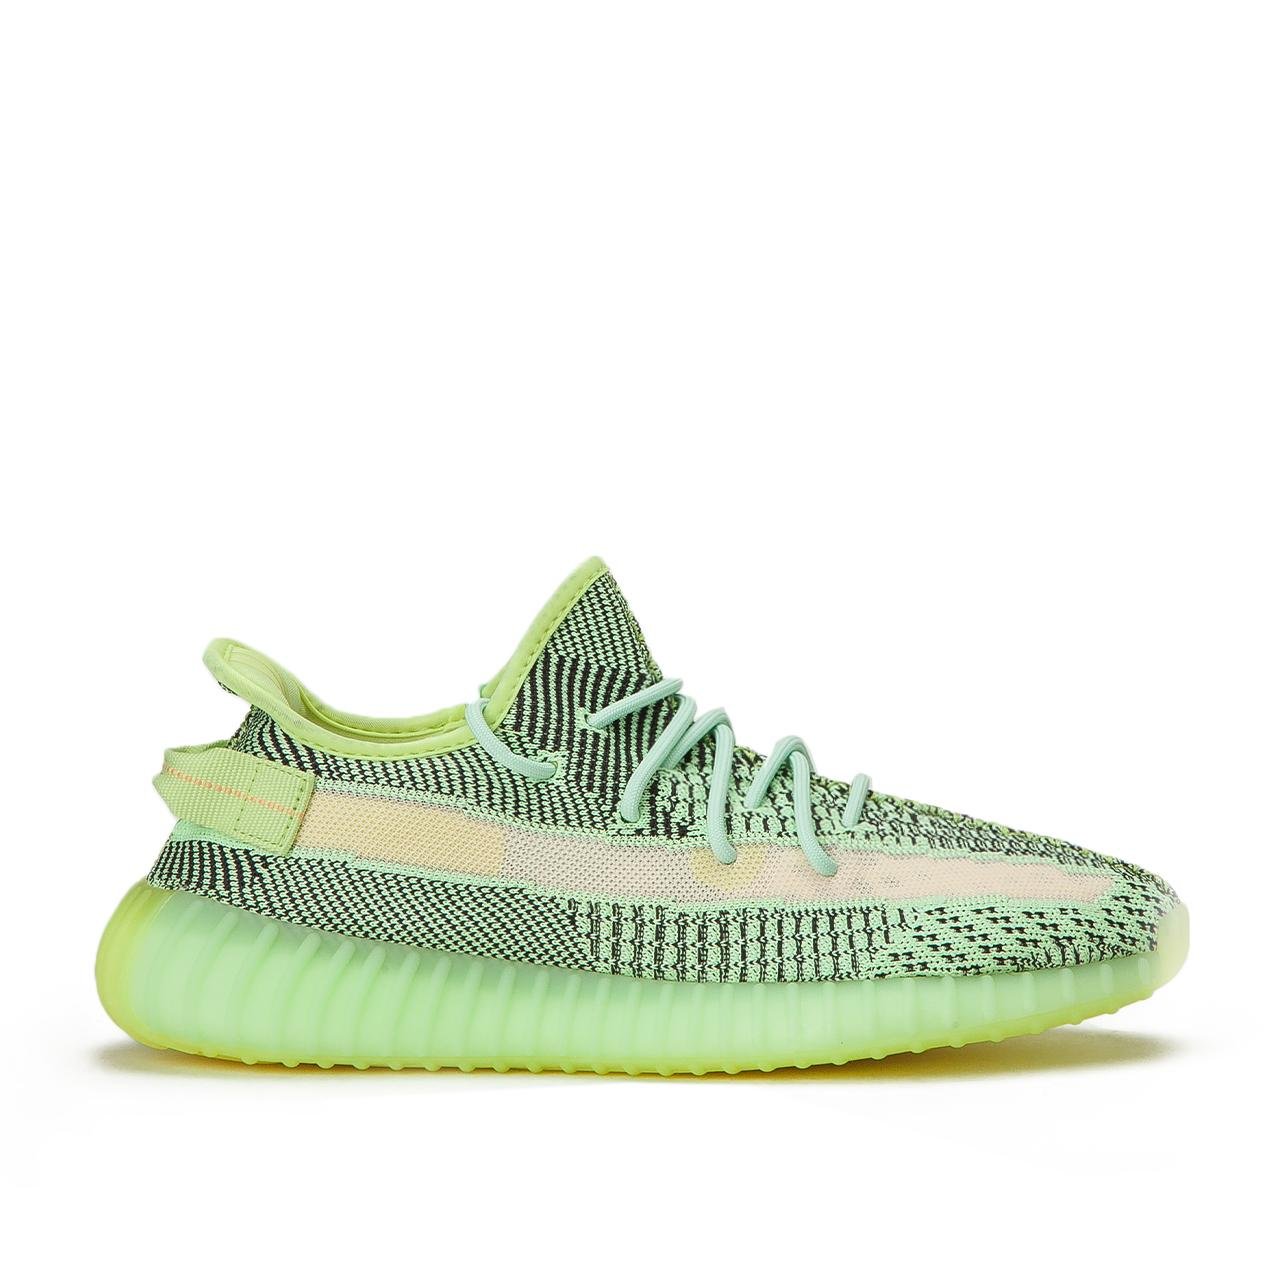 adidas Yeezy Boost 350 V2 ' in Neon 